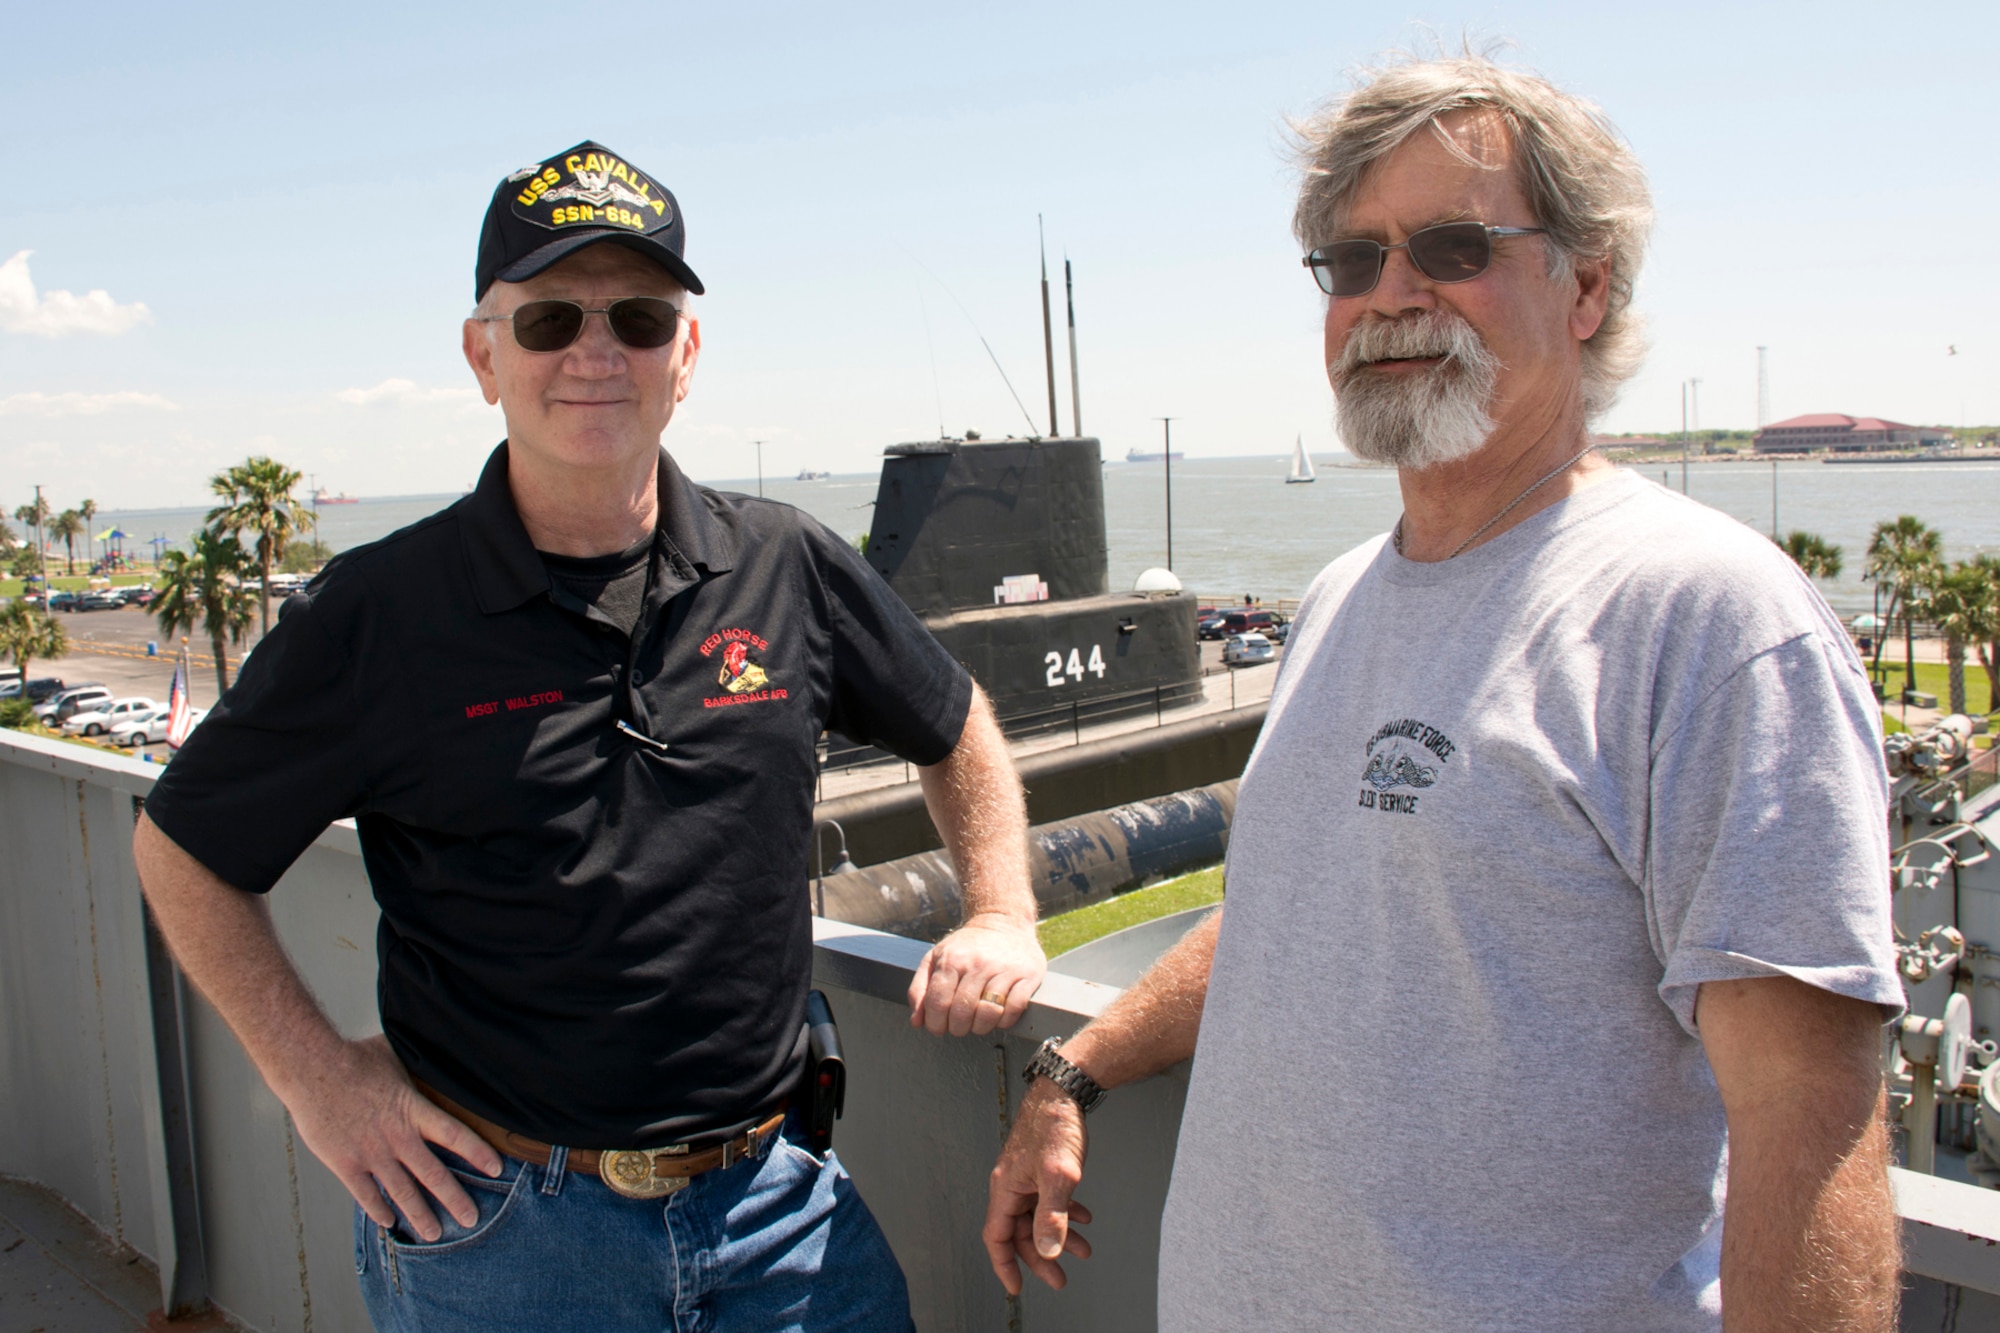 Former U.S. Navy Torpedoman’s Mates Jeff Walston and Sam Chapman, pose for a photo aboard the USS Stewart (DE 238) at Seawolf Park in Galveston, Texas, Apr. 23, 2016. They are attending the All Cavalla Reunion 2016 in Galveston. The bi-annual reunion is an opportunity for former crewmembers of the USS Cavalla SS - SSK - AGSS - 244 and USS Cavalla (SSN 684) to reconnect with each other, make new friends, share sea stories and honor the memory of those submariners who have passed. Walston, who is now a Master Sergeant in the U.S. Air Force Reserve, assigned to the 913th Airlift Group, at Little Rock Air Force Base, Ark., served on the Cavalla (SSN 684) from 1977 to 1979, and left the Navy as a 2nd Class Petty Officer before joining the Air Force Reserve. (Courtesy photo by Eva Walston)